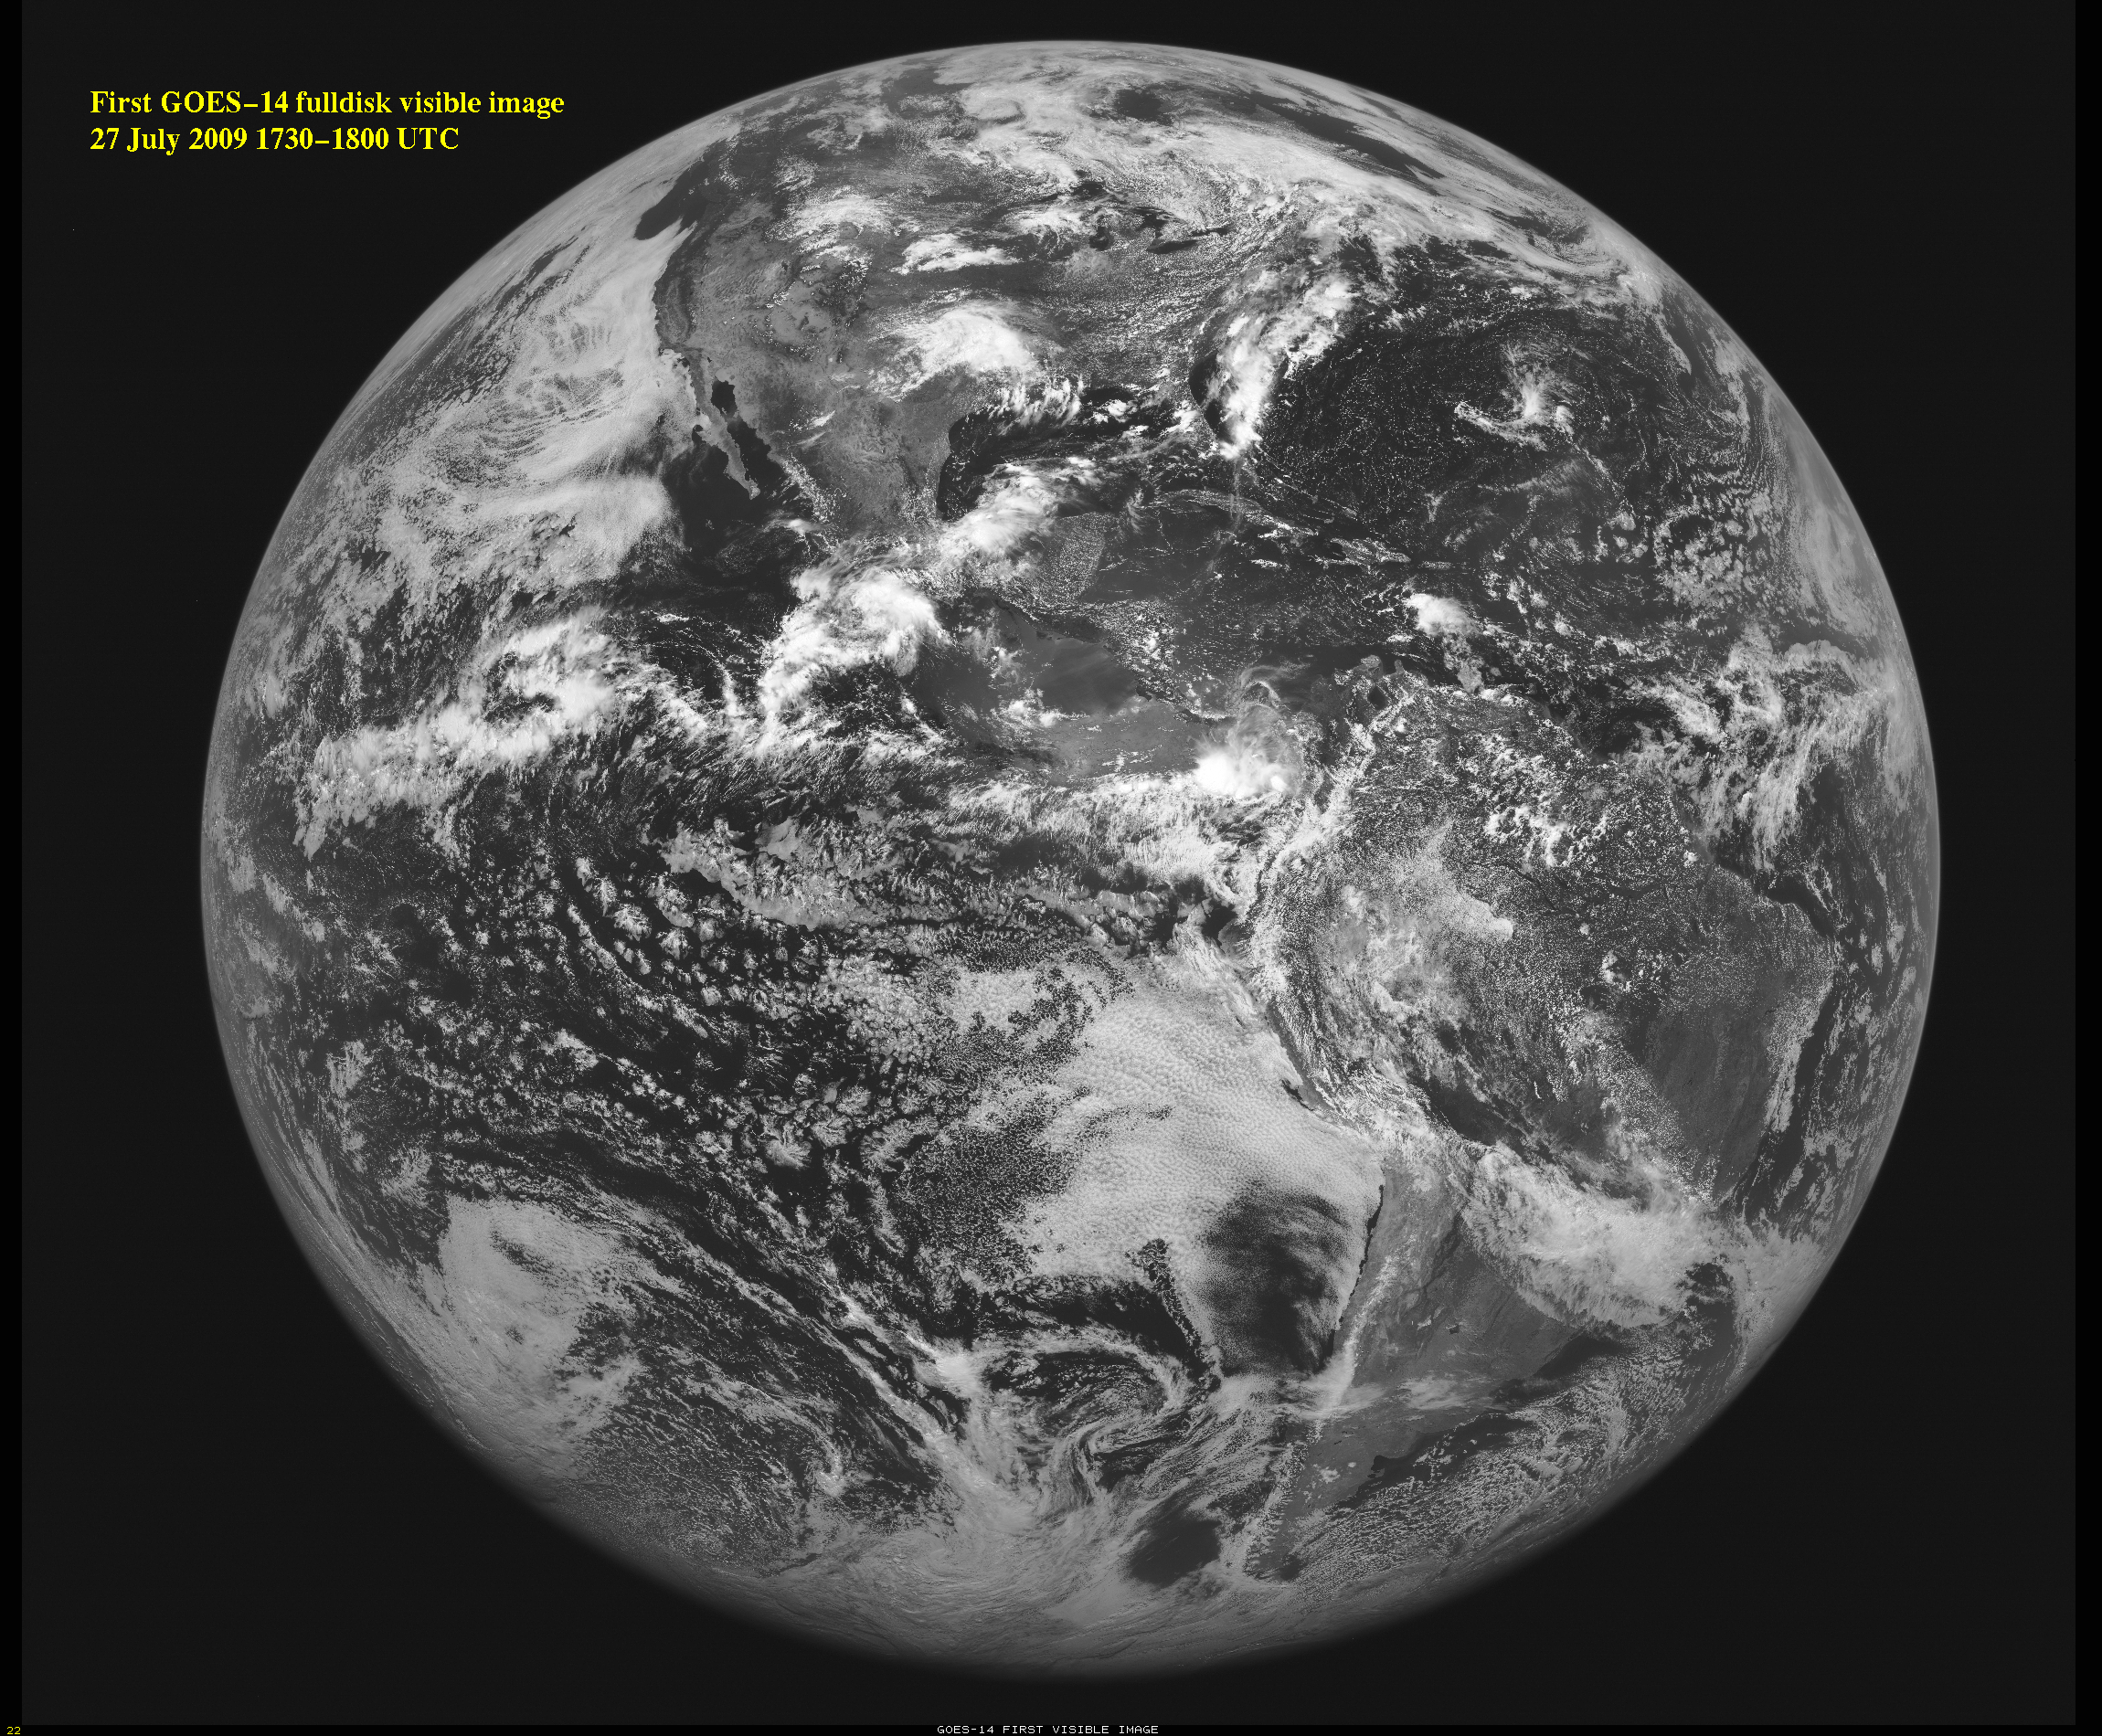 First GOES-14 full-disk visible image